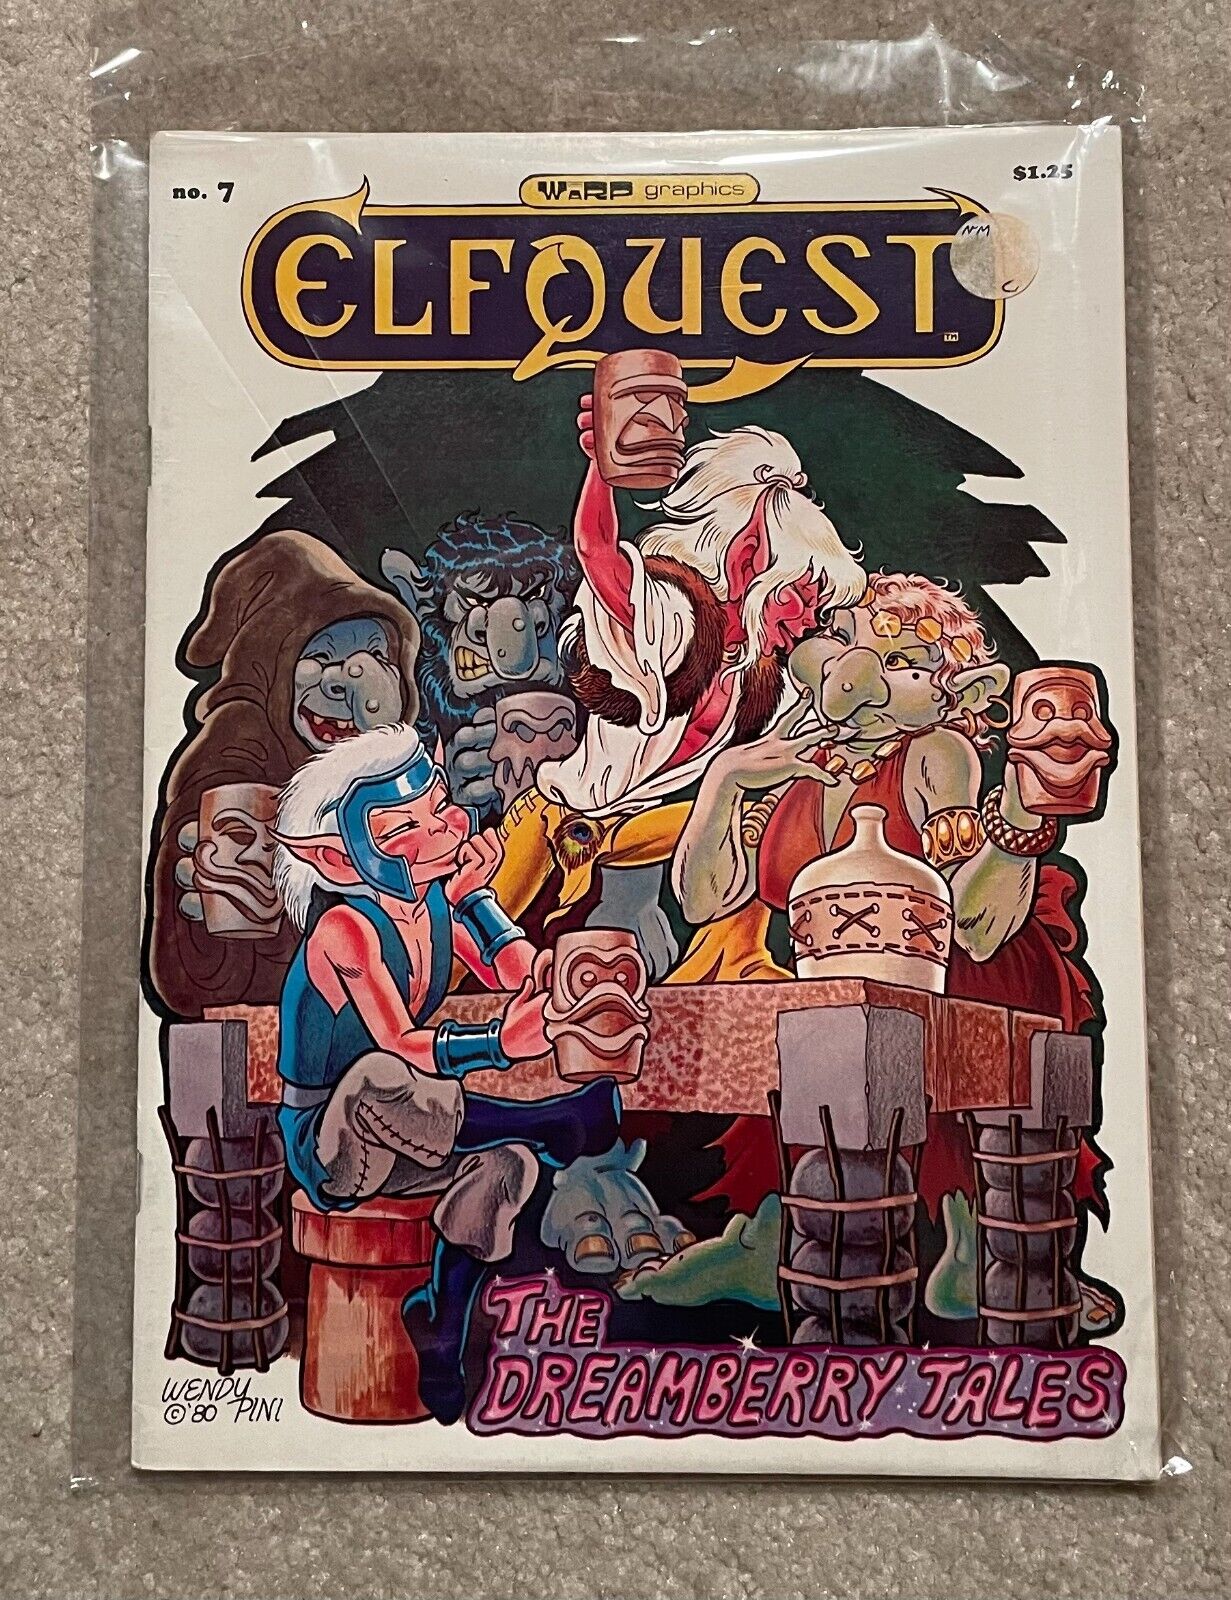 ELFQUEST #7 $1.25 cover; magazine size; 1st printing